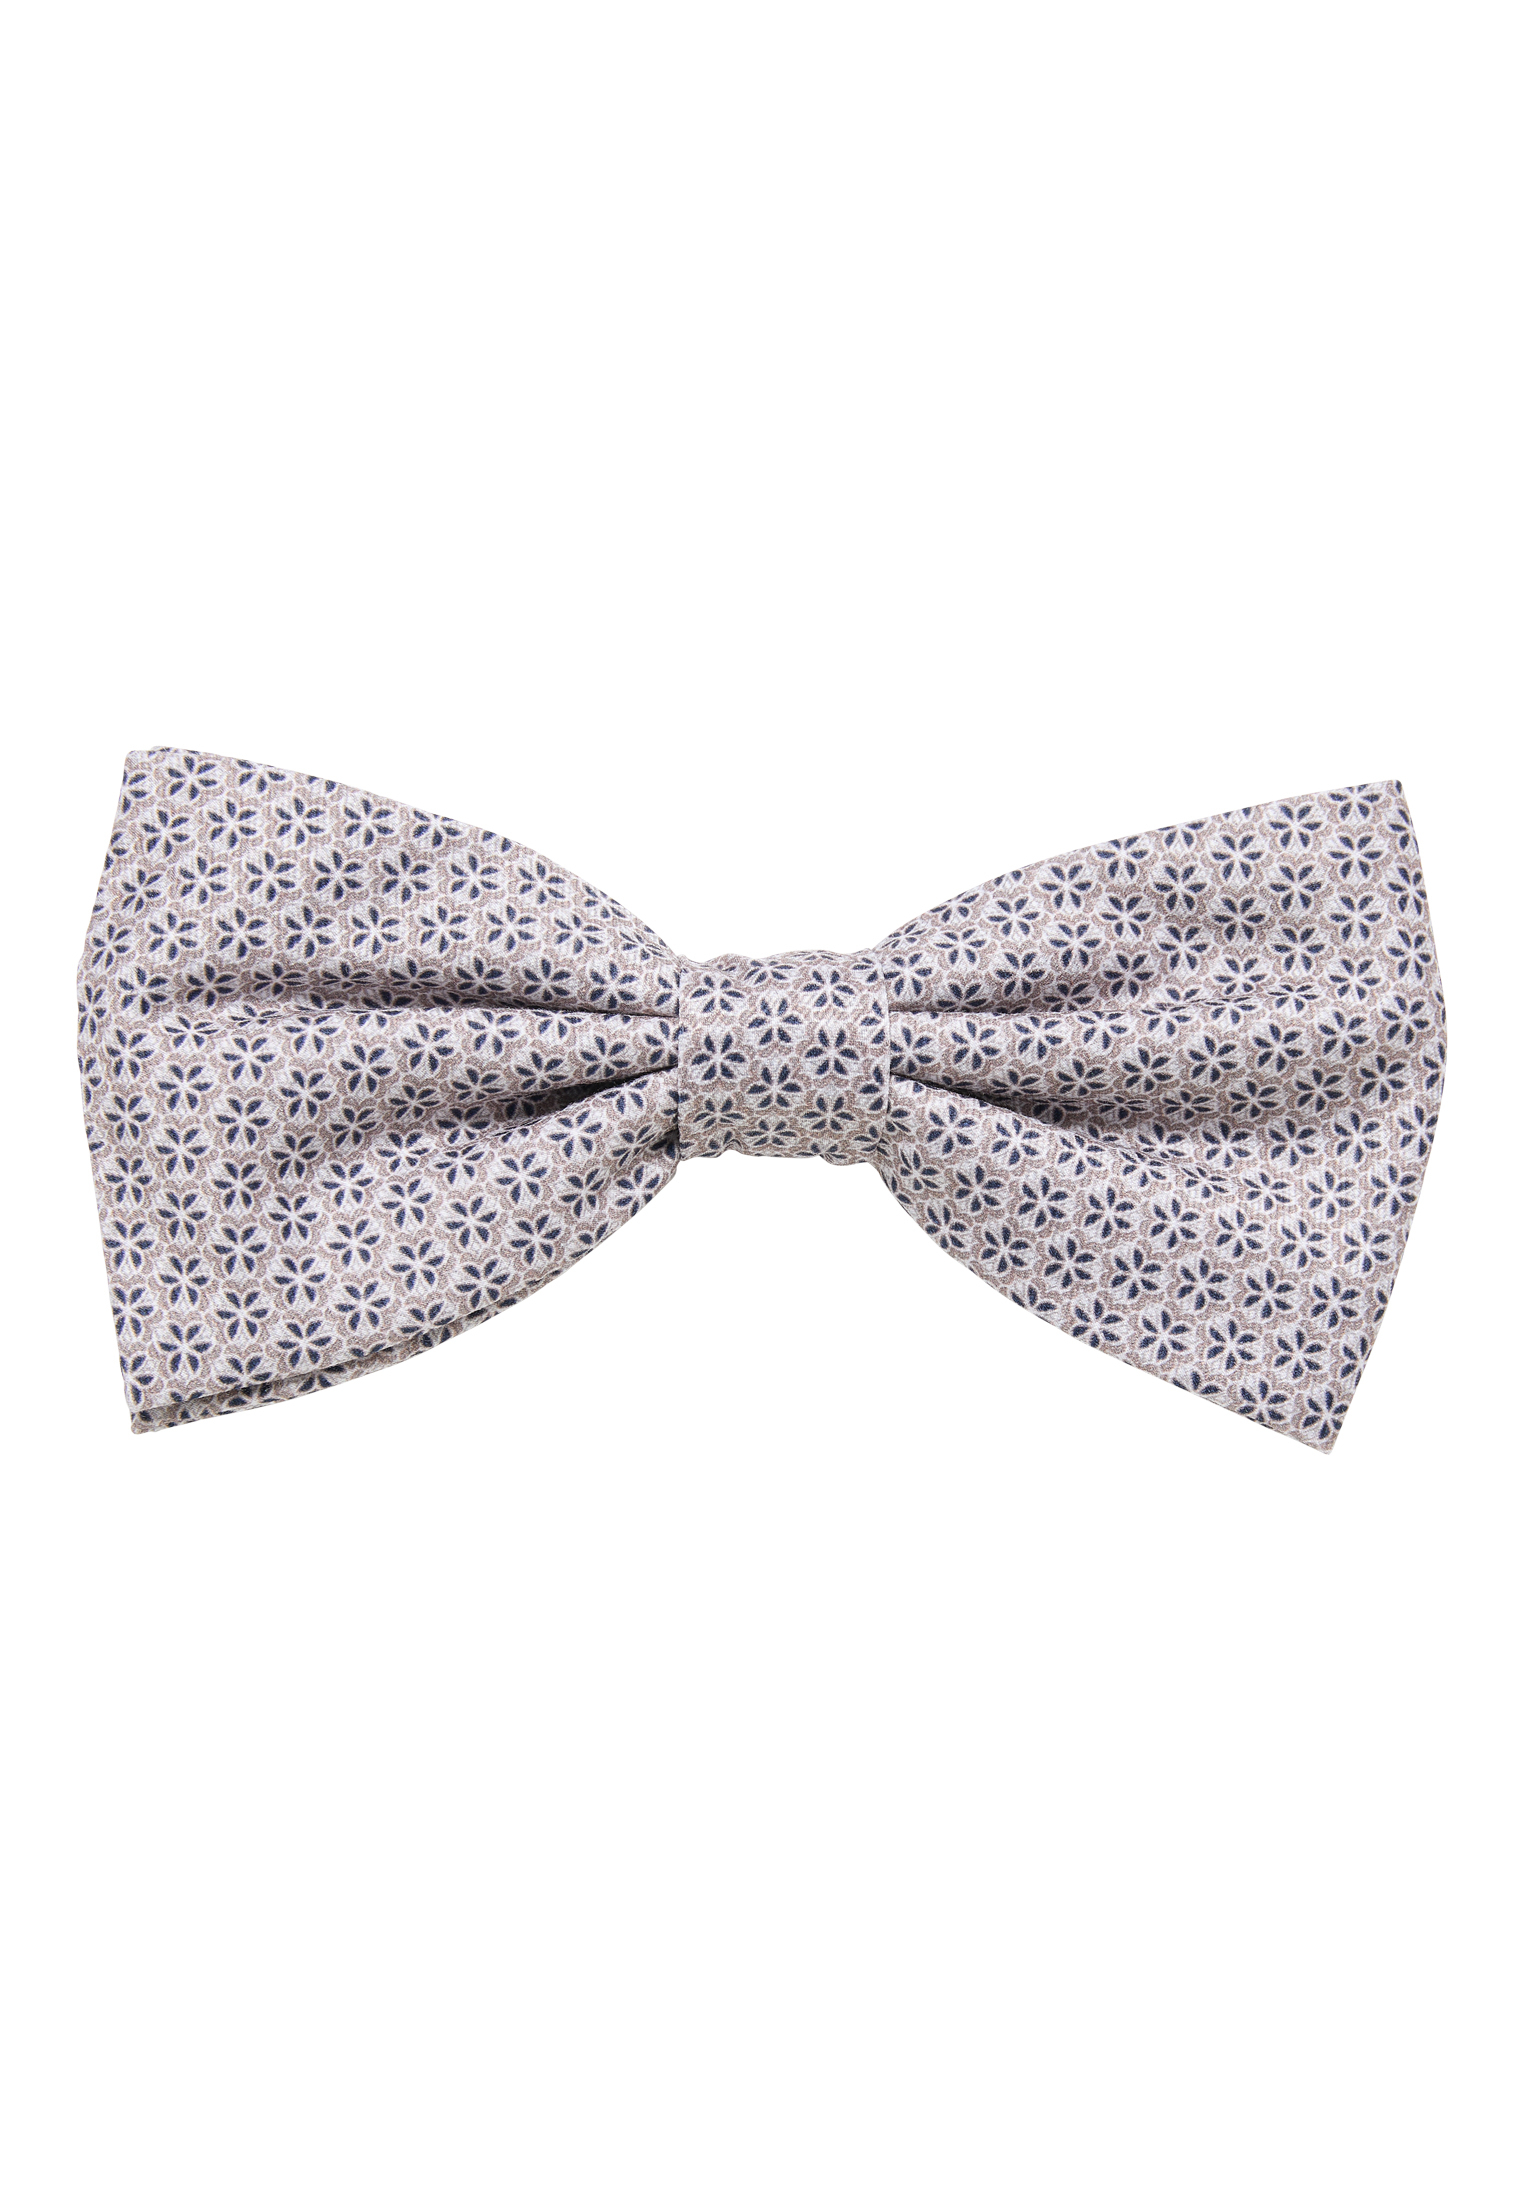 Bowtie in sand printed